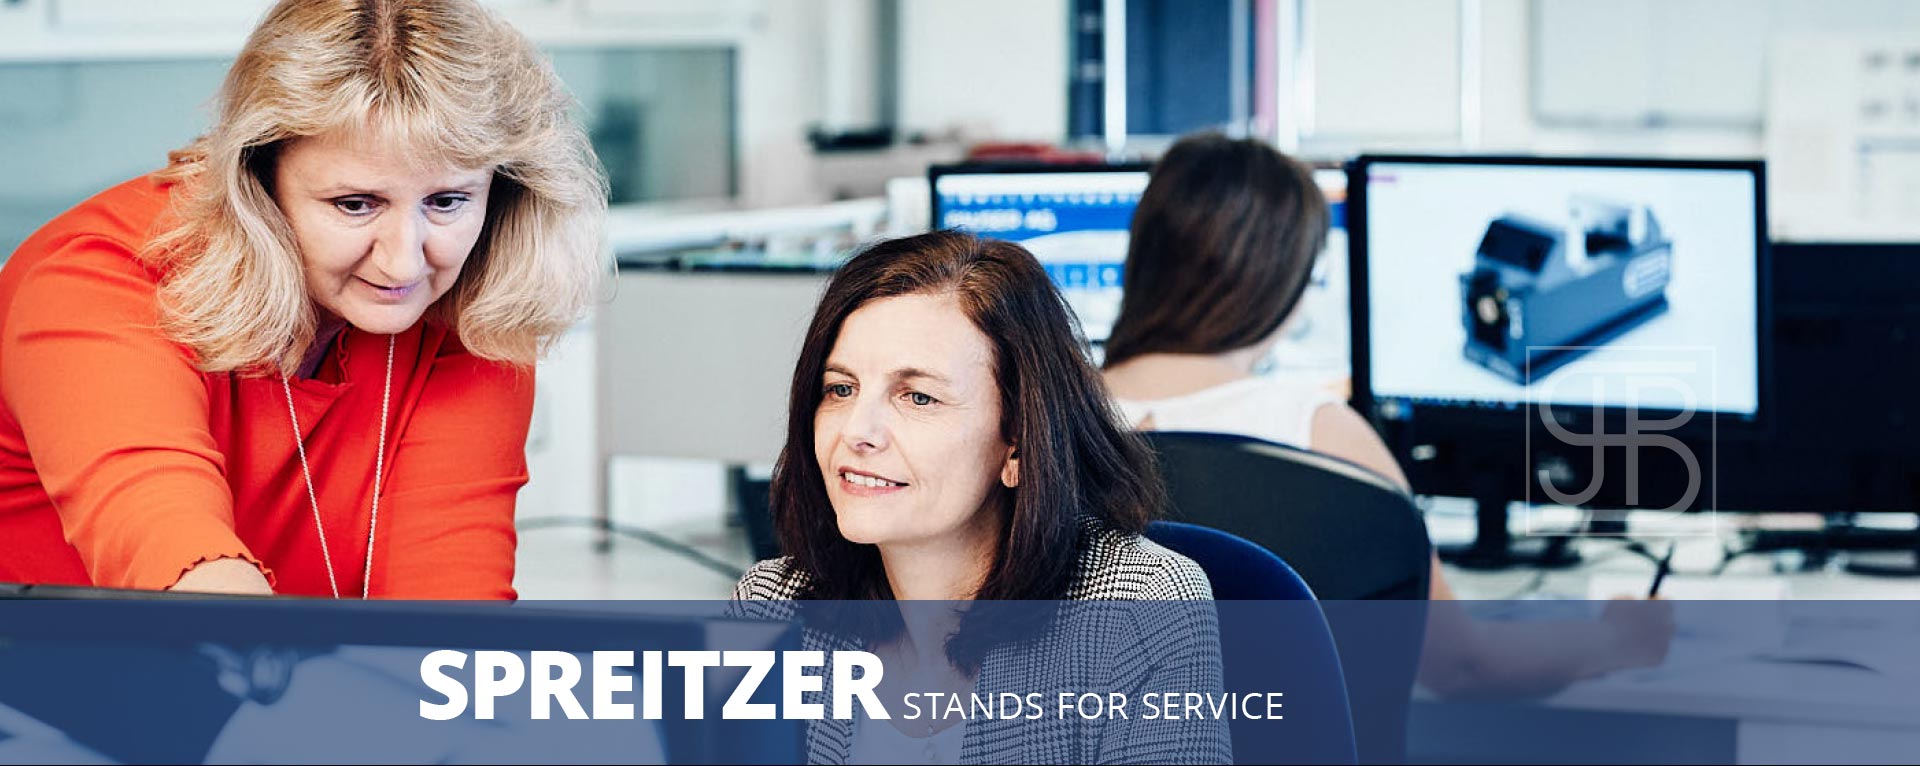 Spreitzer stands for service